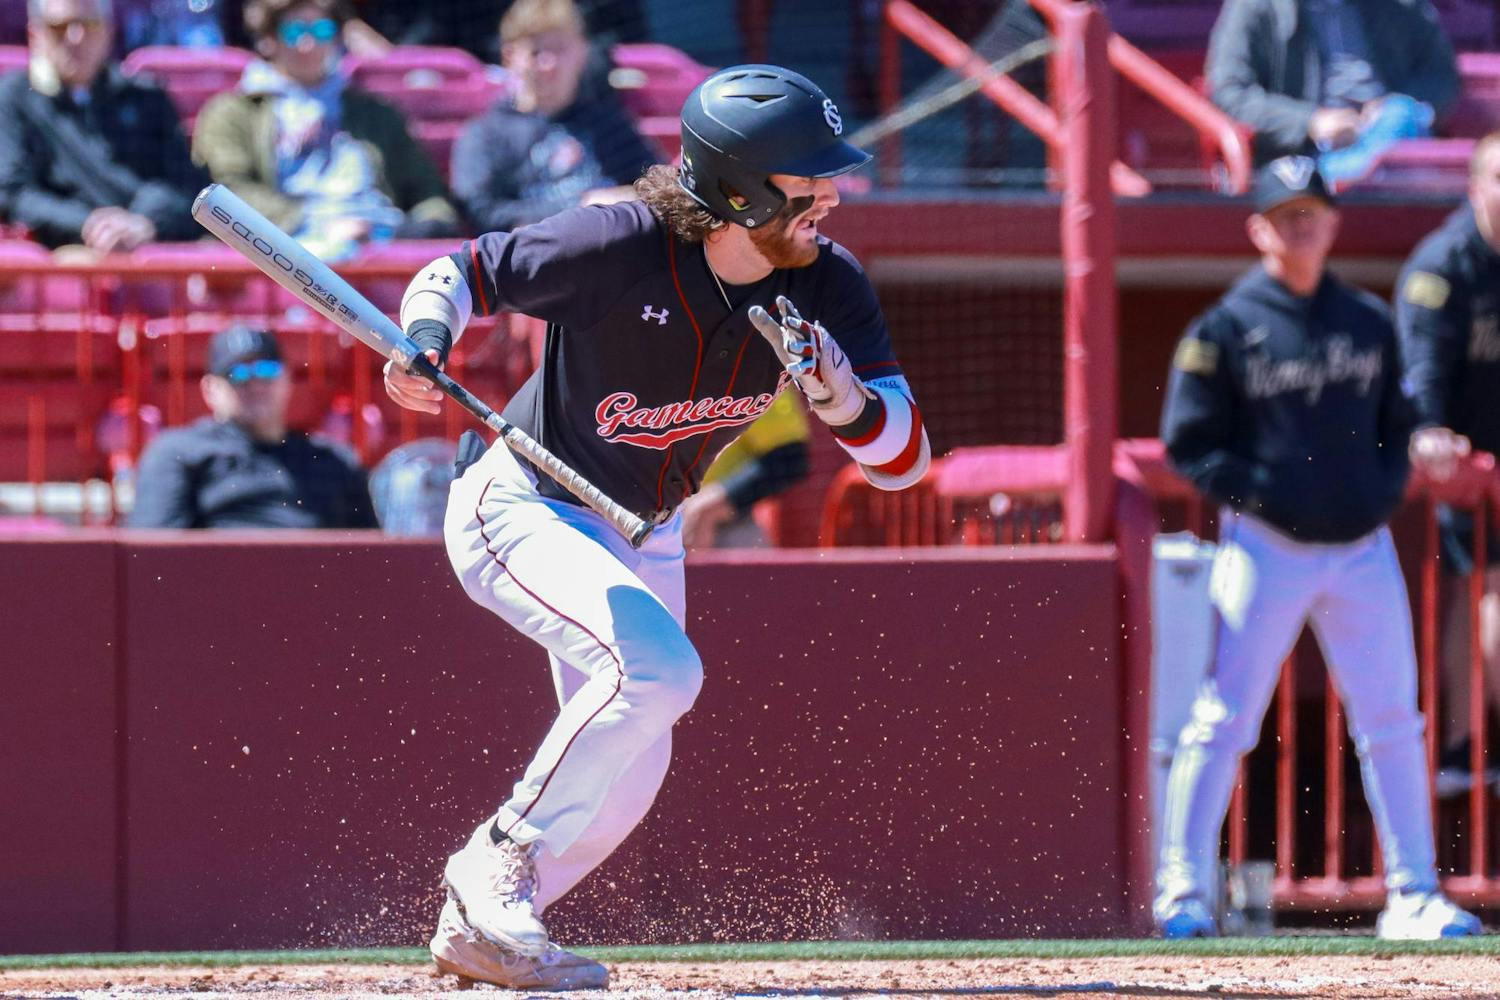 Junior infielder Talmadge LeCroy bunts a pitch from the Commodores at Founders Park on March 24, 2024. LeCroy scored 1 run in the ɫɫƵs' 10-2 victory that secured the sweep over Vanderbilt.